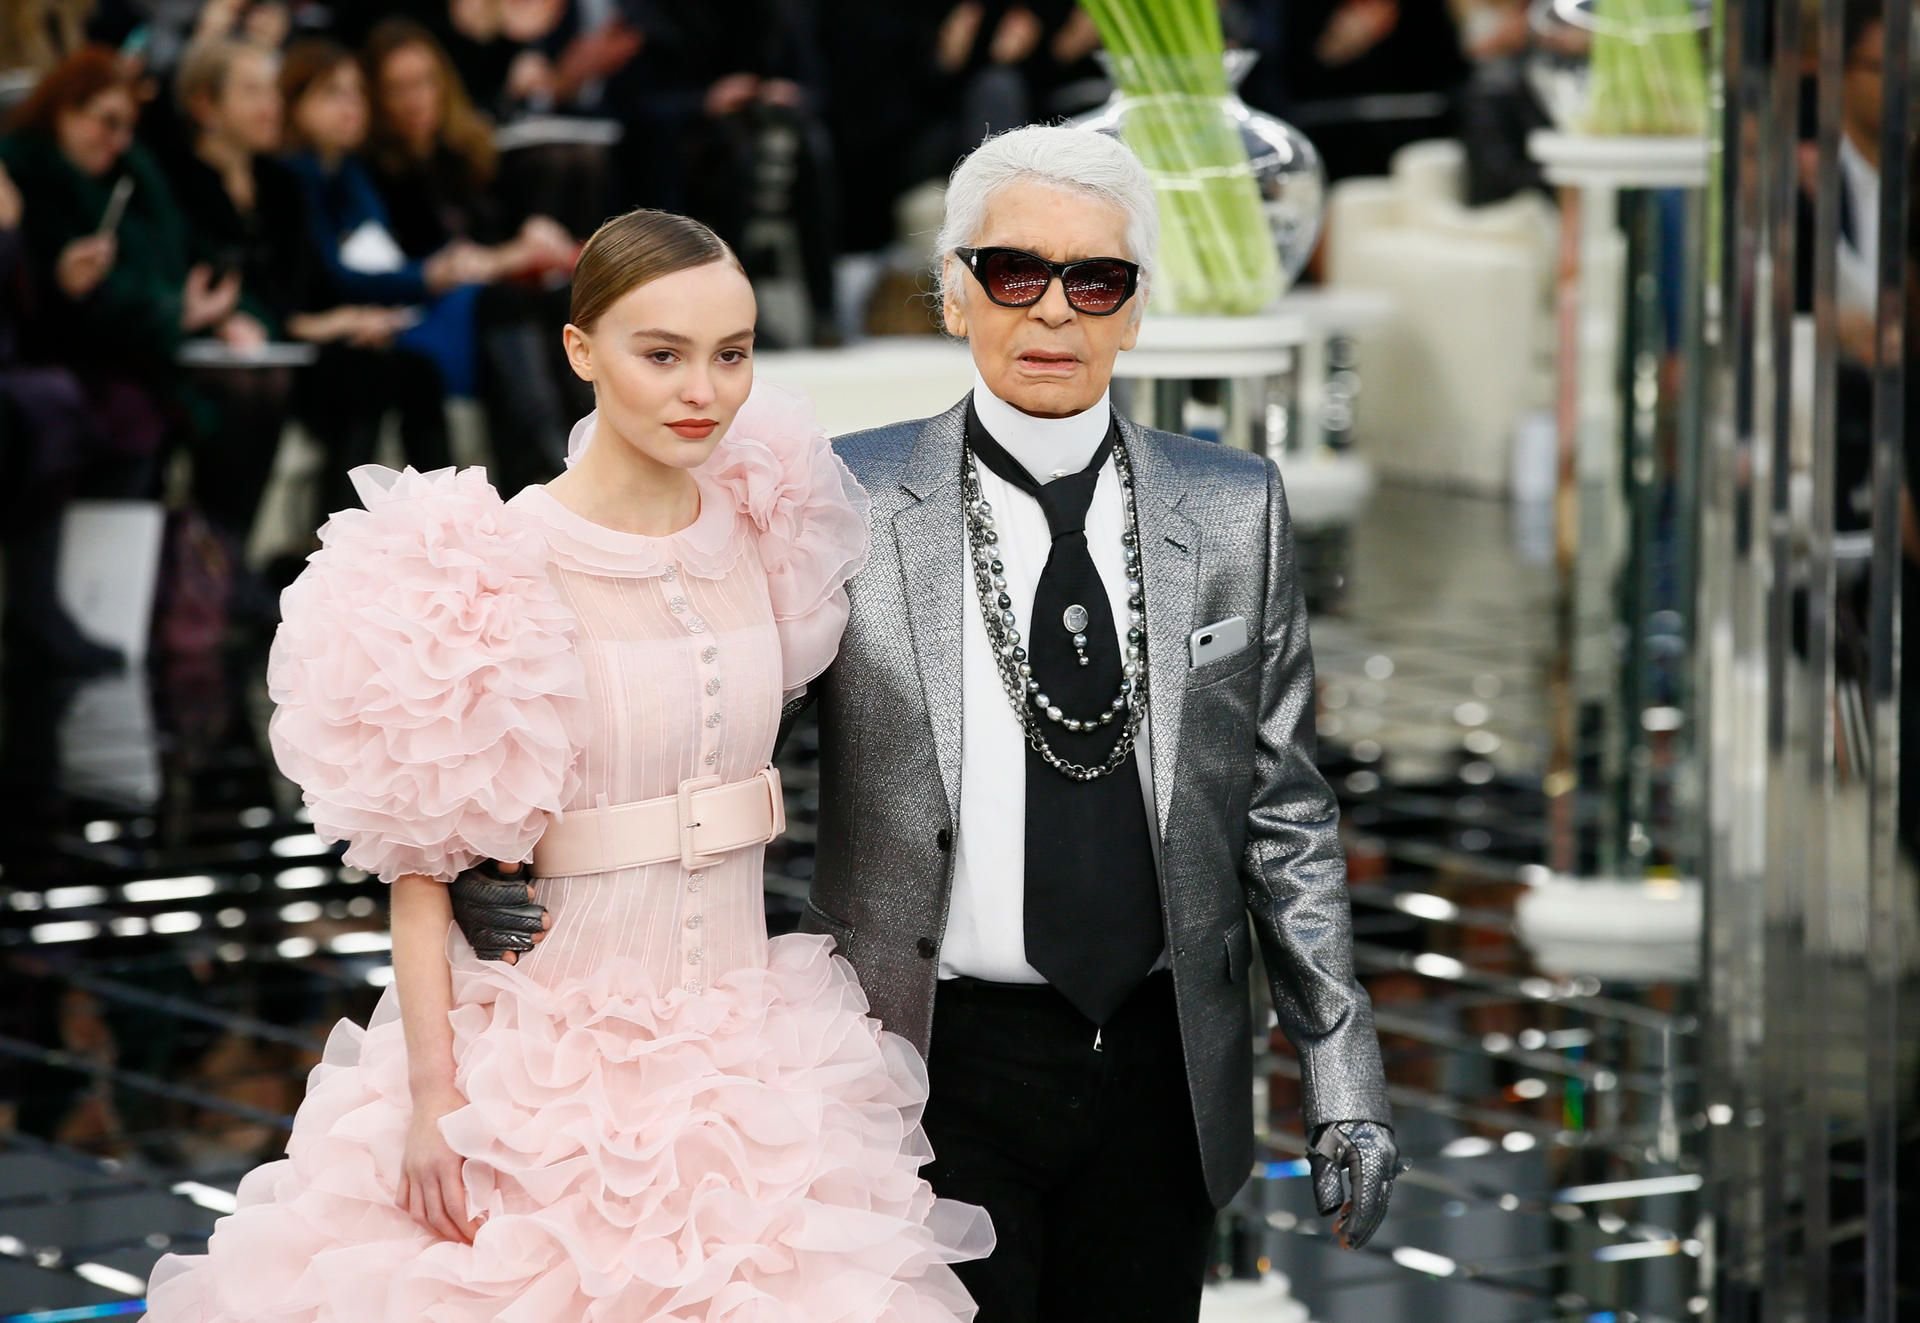 Johnny Depp Quite Worried About Lily-Rose's Modeling Career: Report